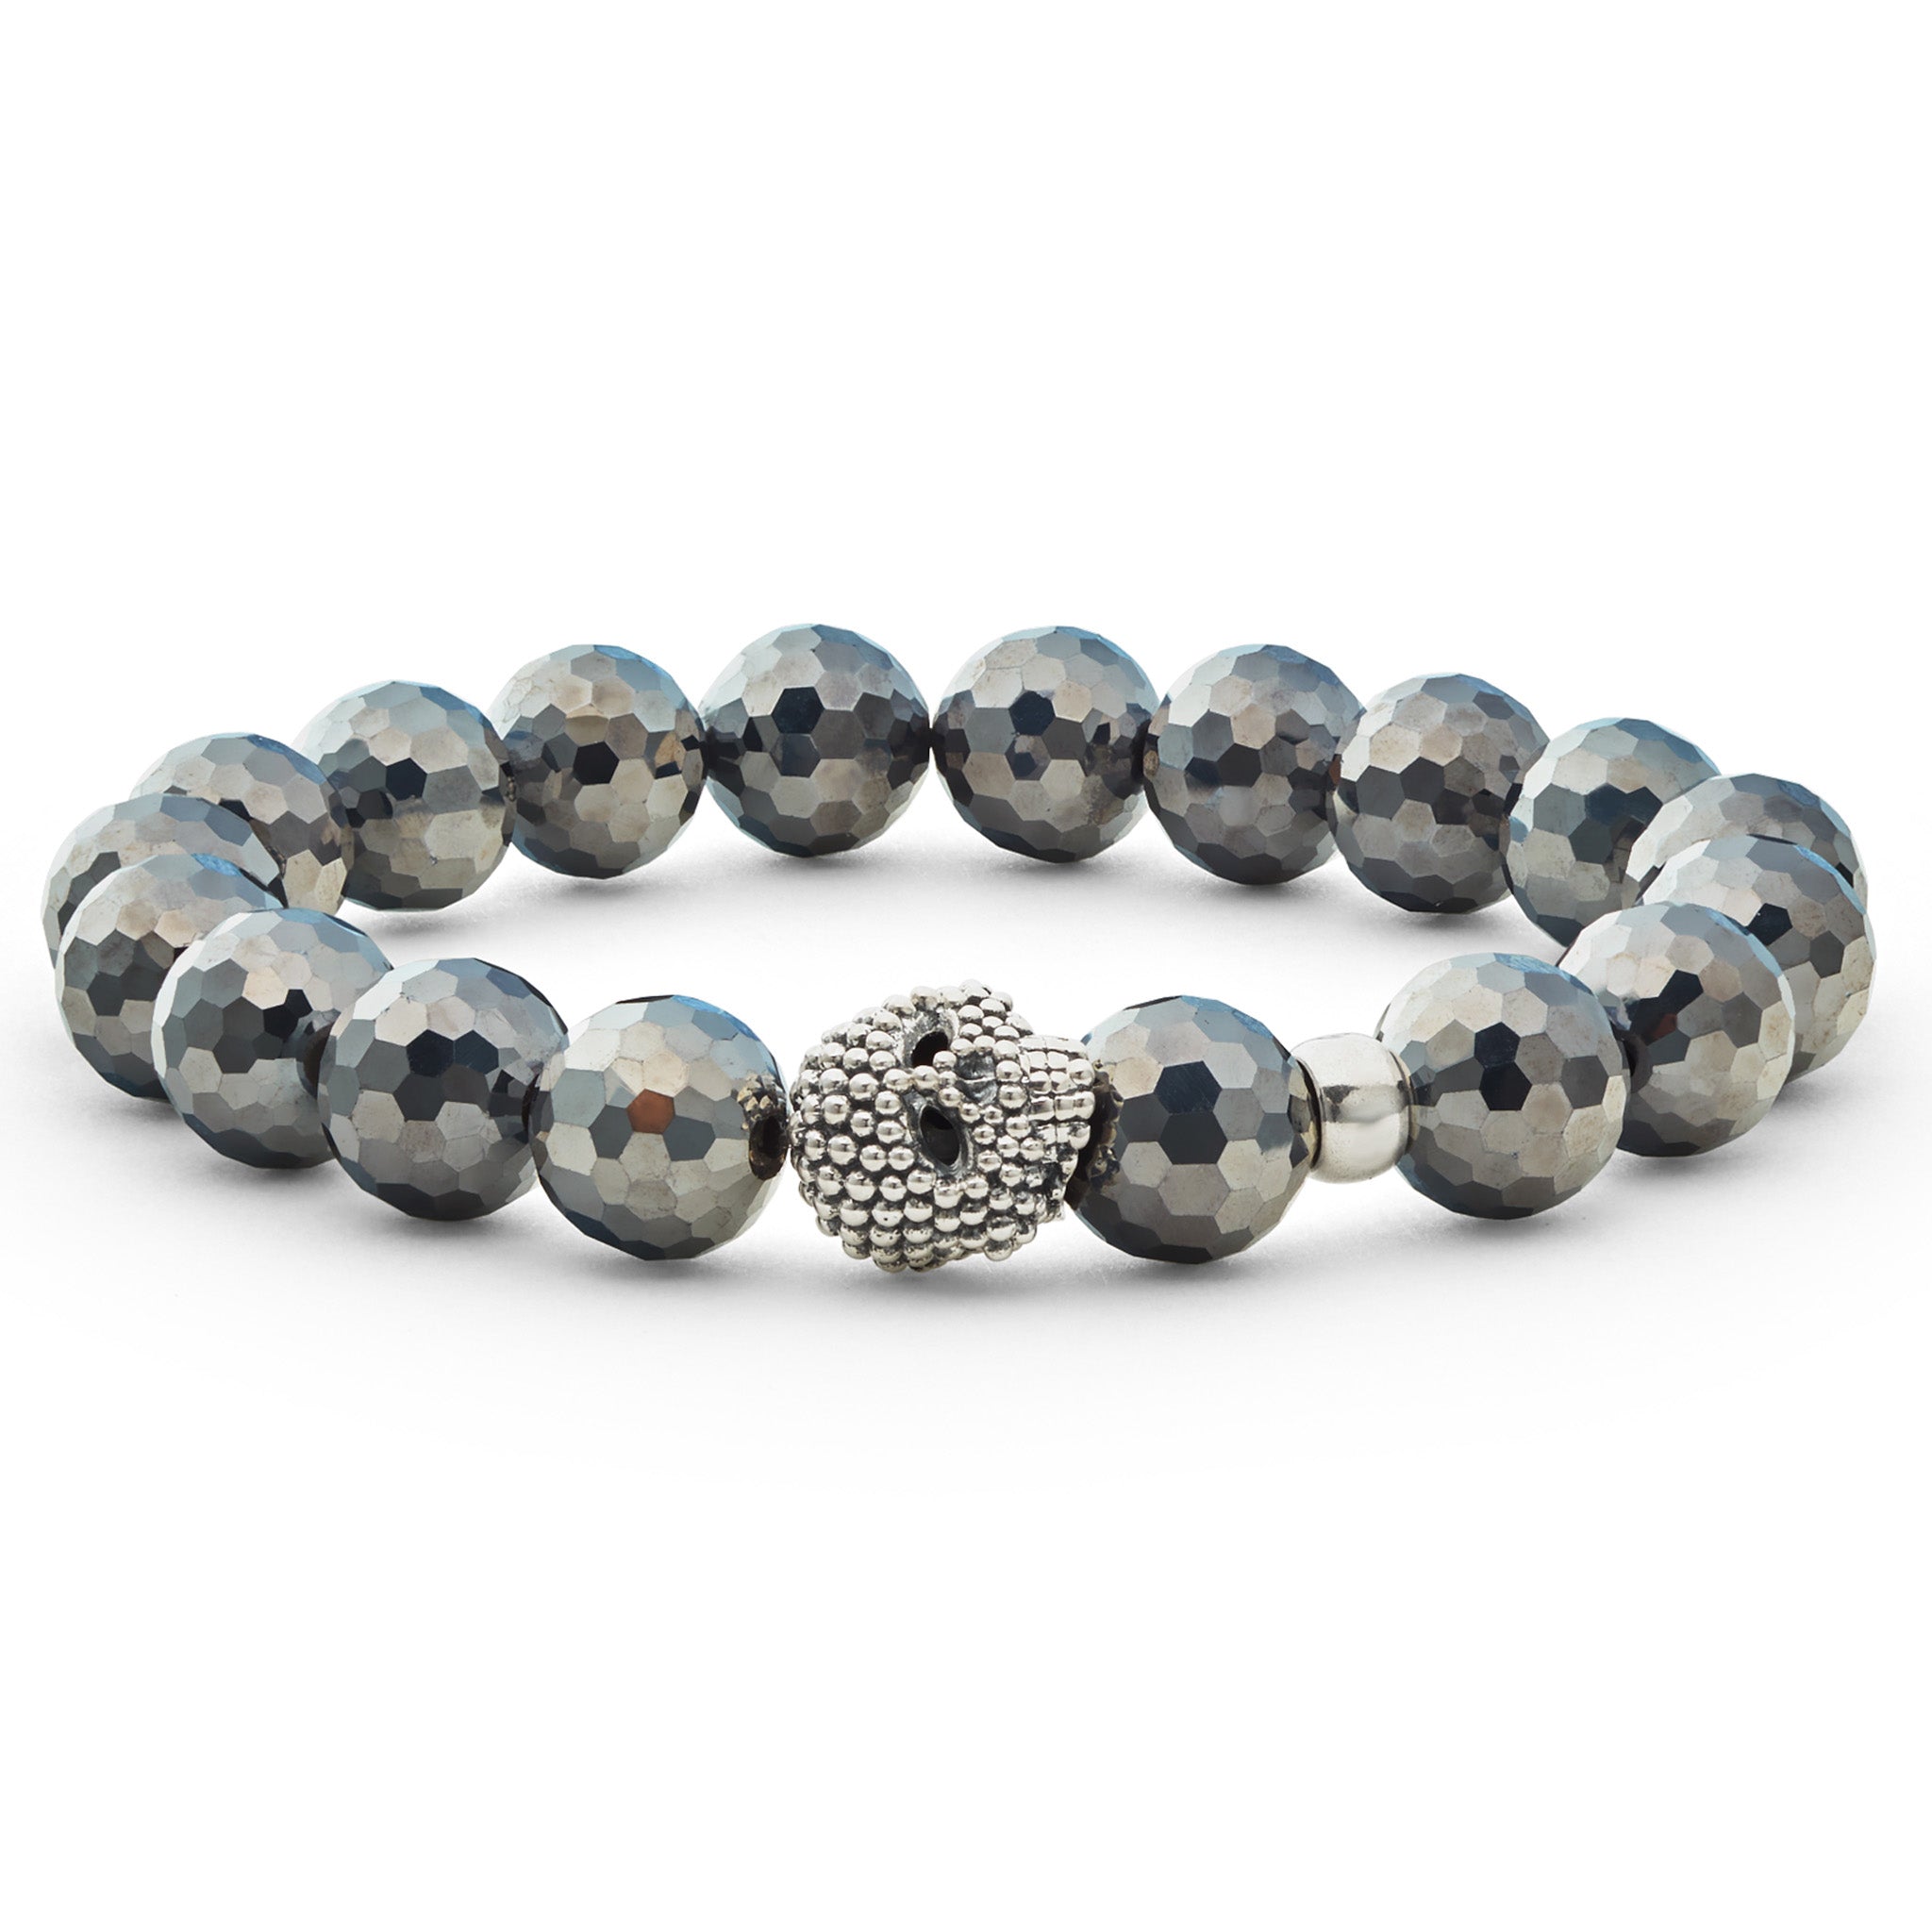 STAINLESS STEEL SCULL BRACELET - Bags and Bling